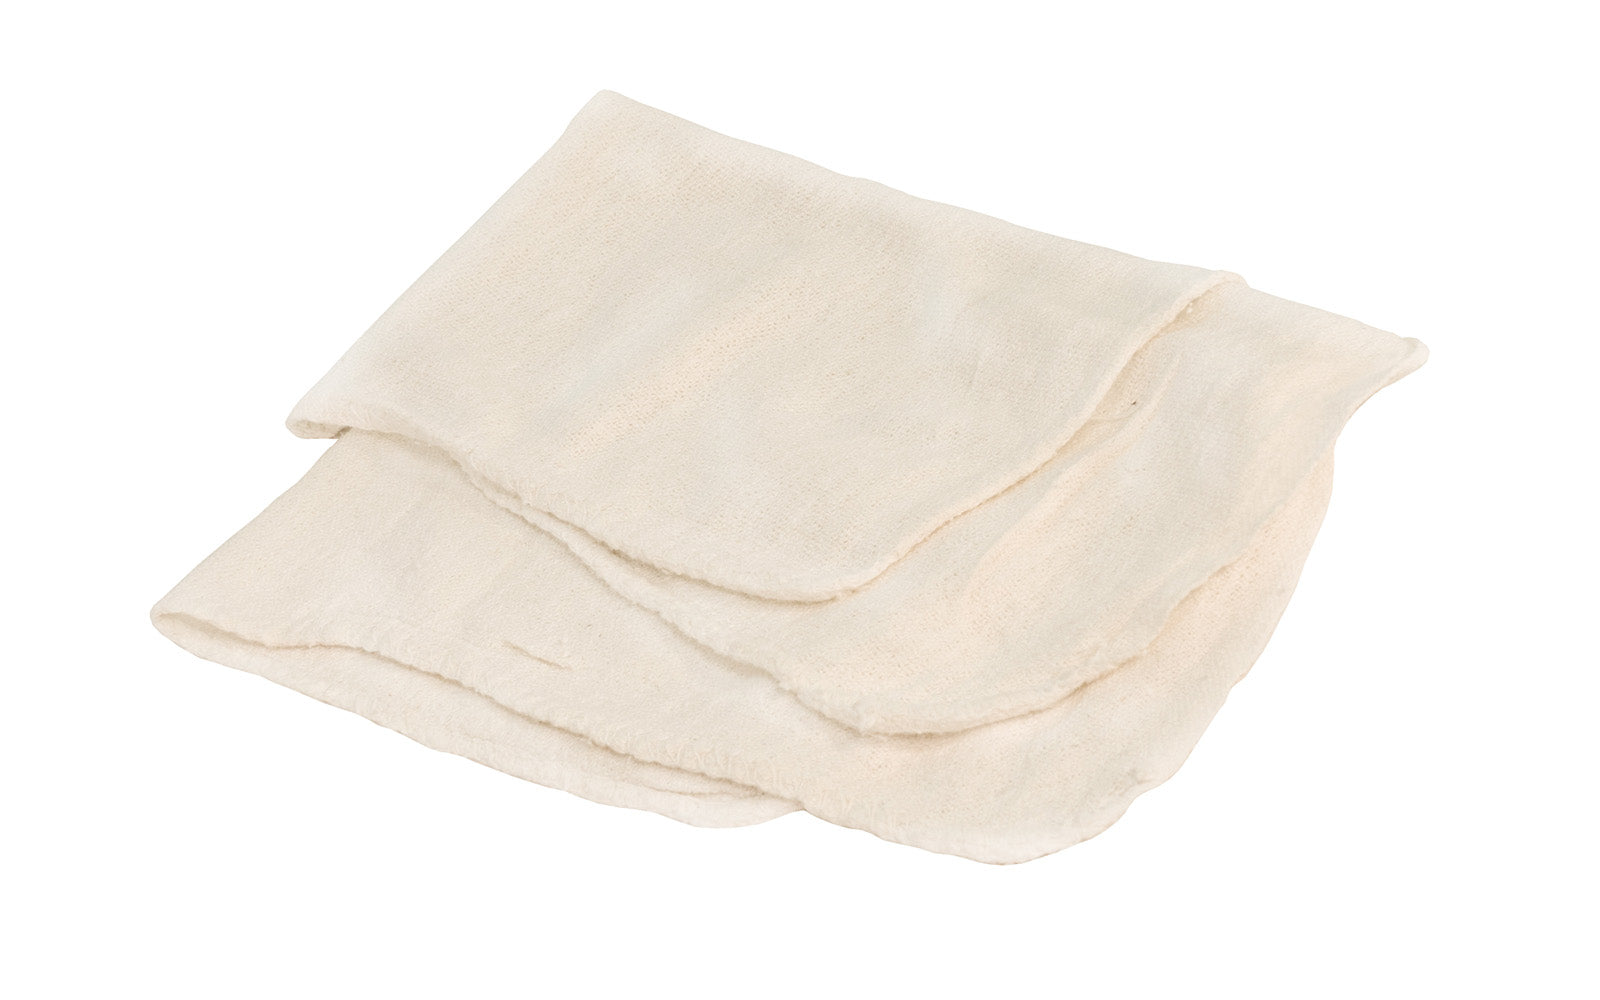 Better Than Cheesecloth” towels are best towels out there for wiping & buffing wax. If you need a lint-free towel, this is what you’ve been looking for. Cheesecloth material is very soft, terry towels are rough, T-shirts are too smooth, but these cloths are excellent lint-free towels. Washable & reusable. Lint free rag